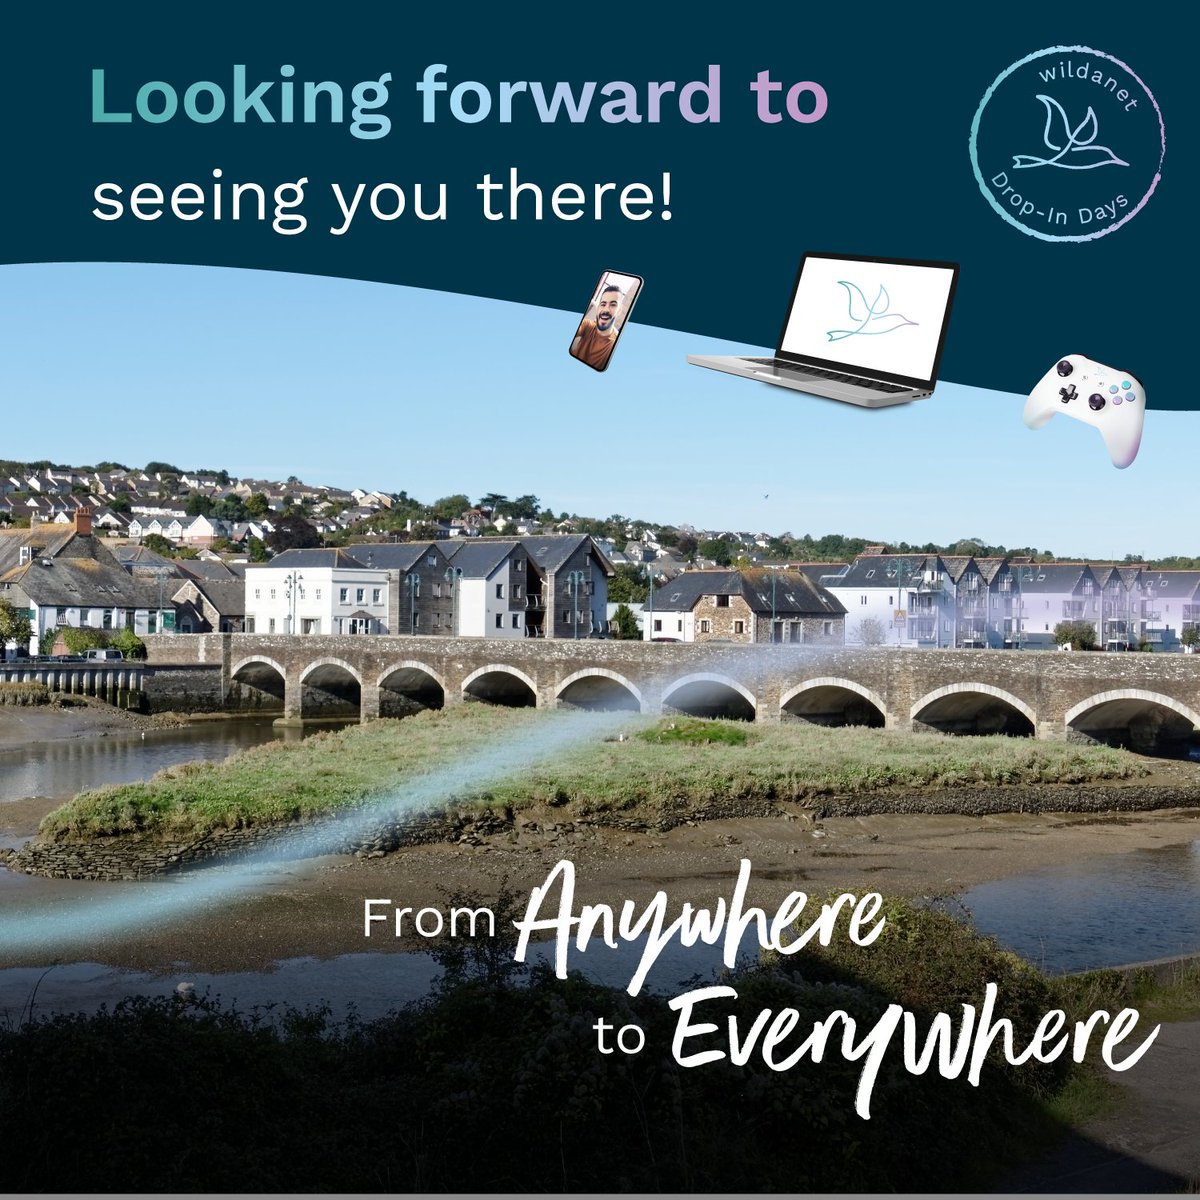 We’re having a drop-in session this Wednesday 8th February in Wadebridge Town Hall in the Foyer Room. Come along and chat to our friendly and knowledgeable team about Wildanet’s high speed, full fibre broadband network and find out more about our amazing early bird offers!